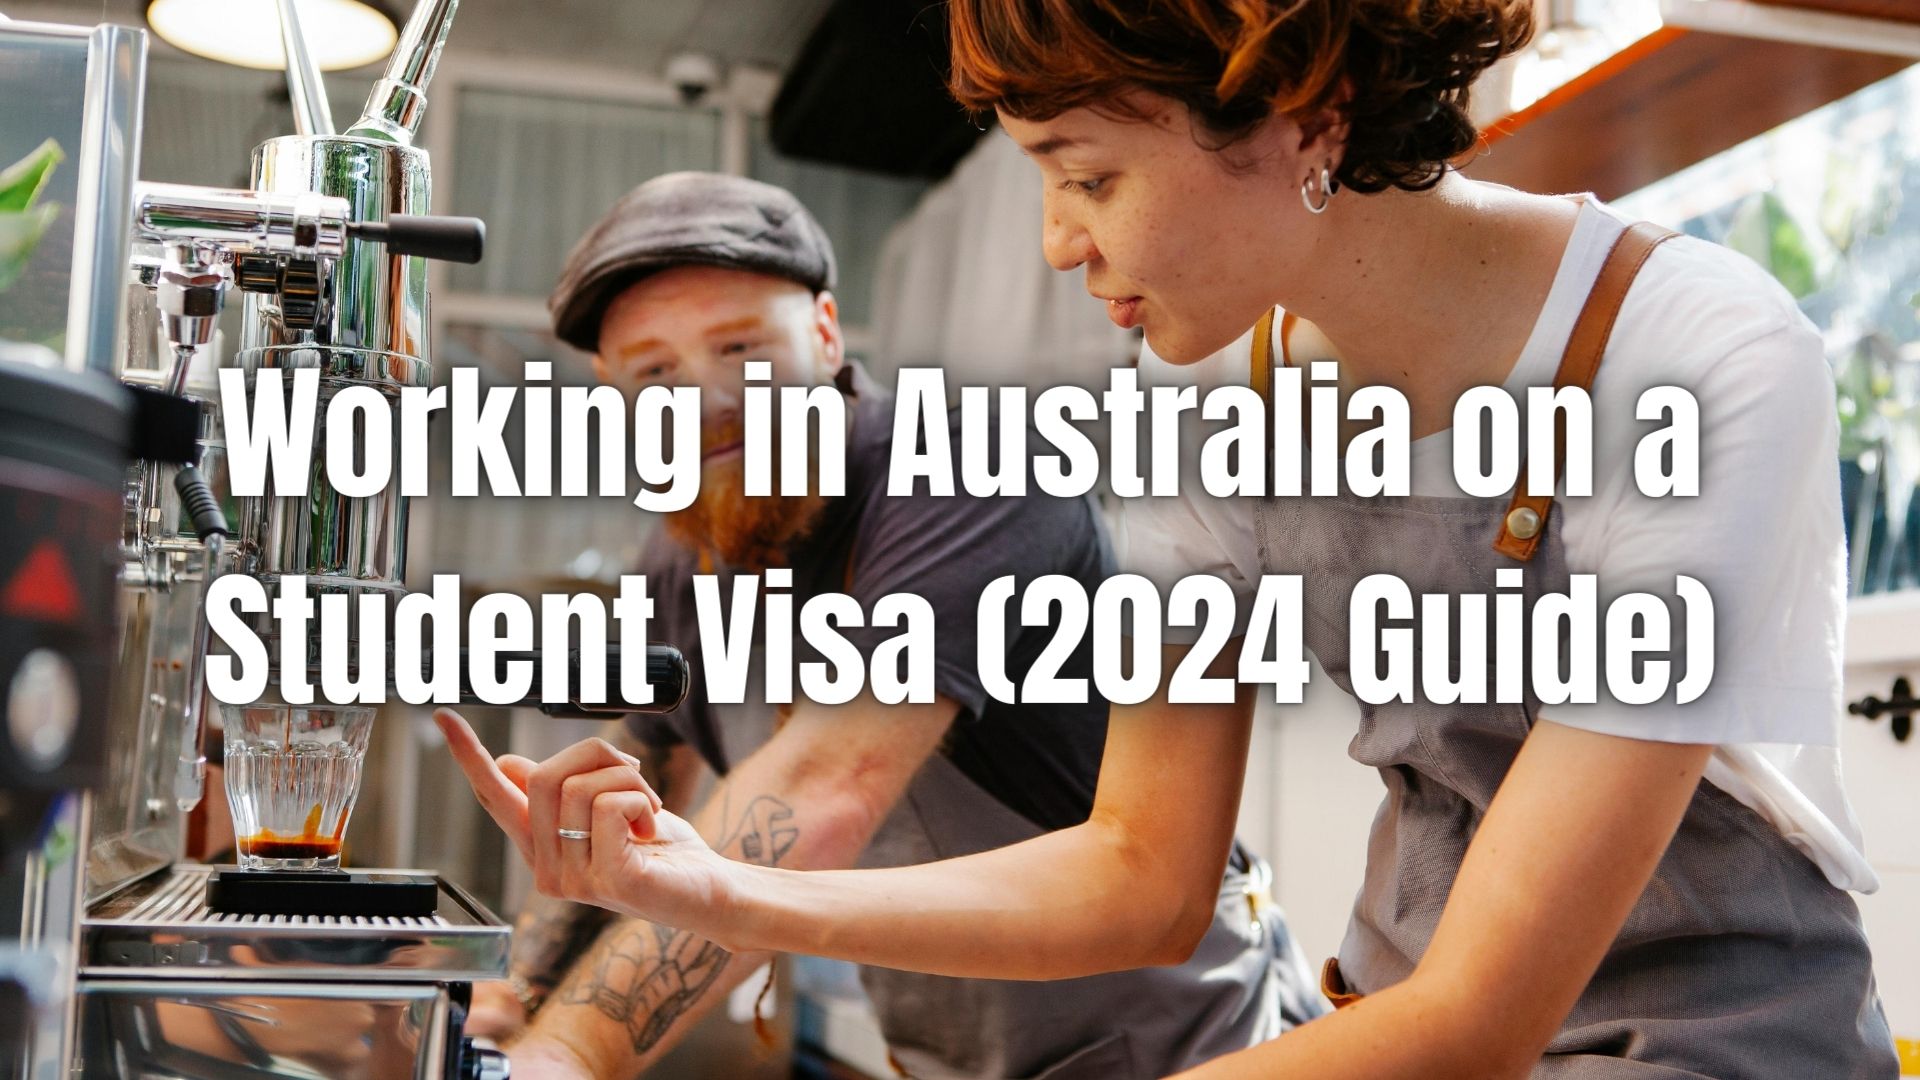 Work in Australia on a Student Visa (2024 Guide)! Earn money while you study. Understand legalities and hour limits.